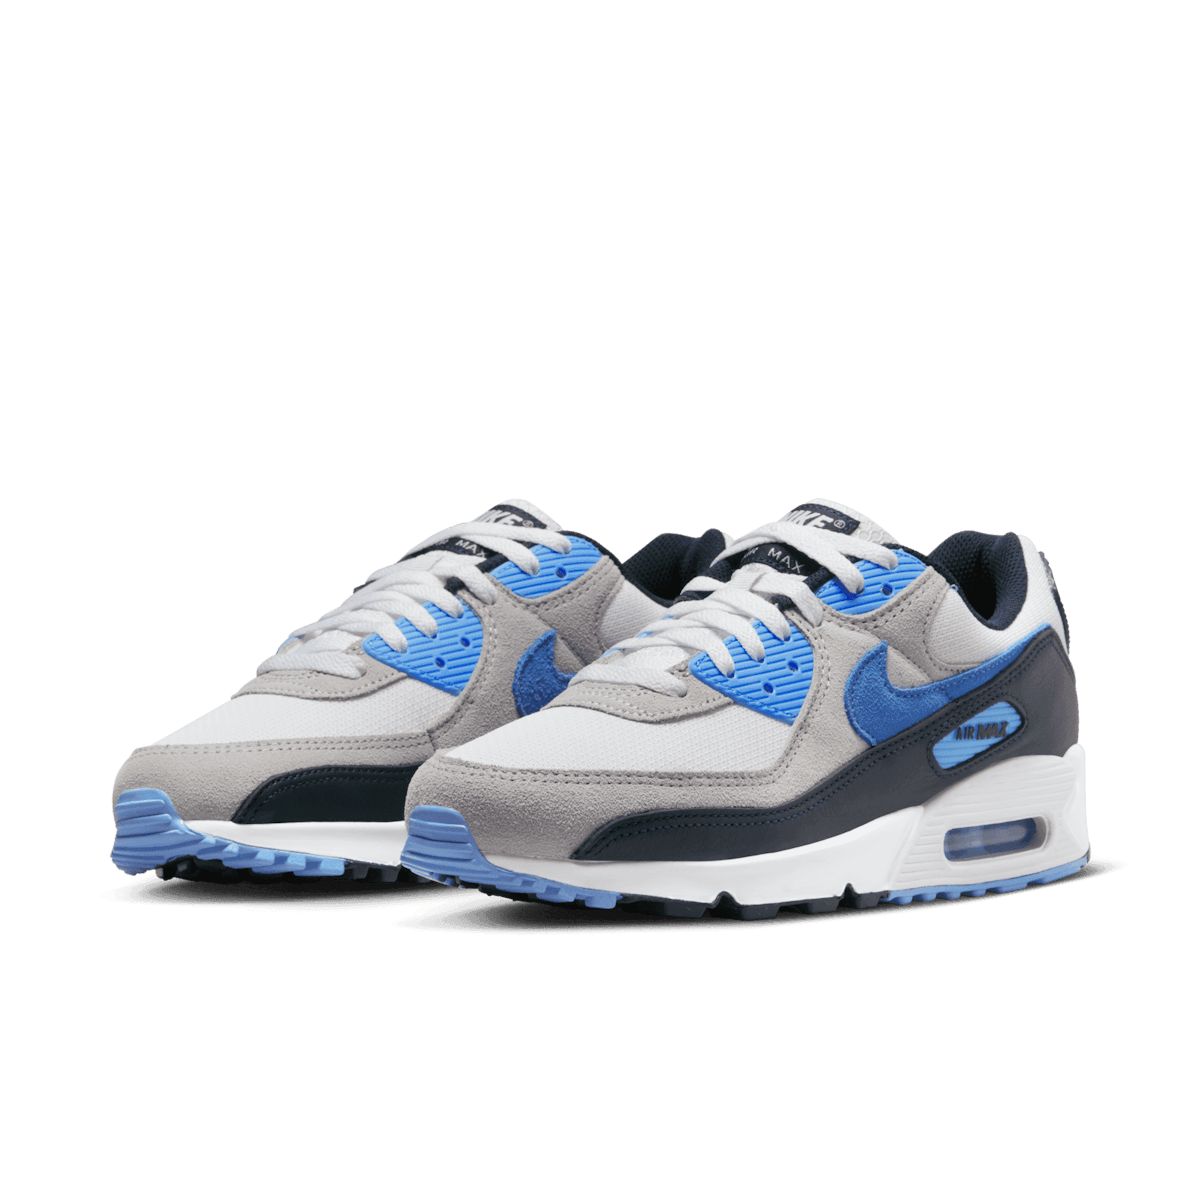 Nike Air Max 90 White University Blue Dark Obsidian - DQ4071-101 Raffles  and Release Date